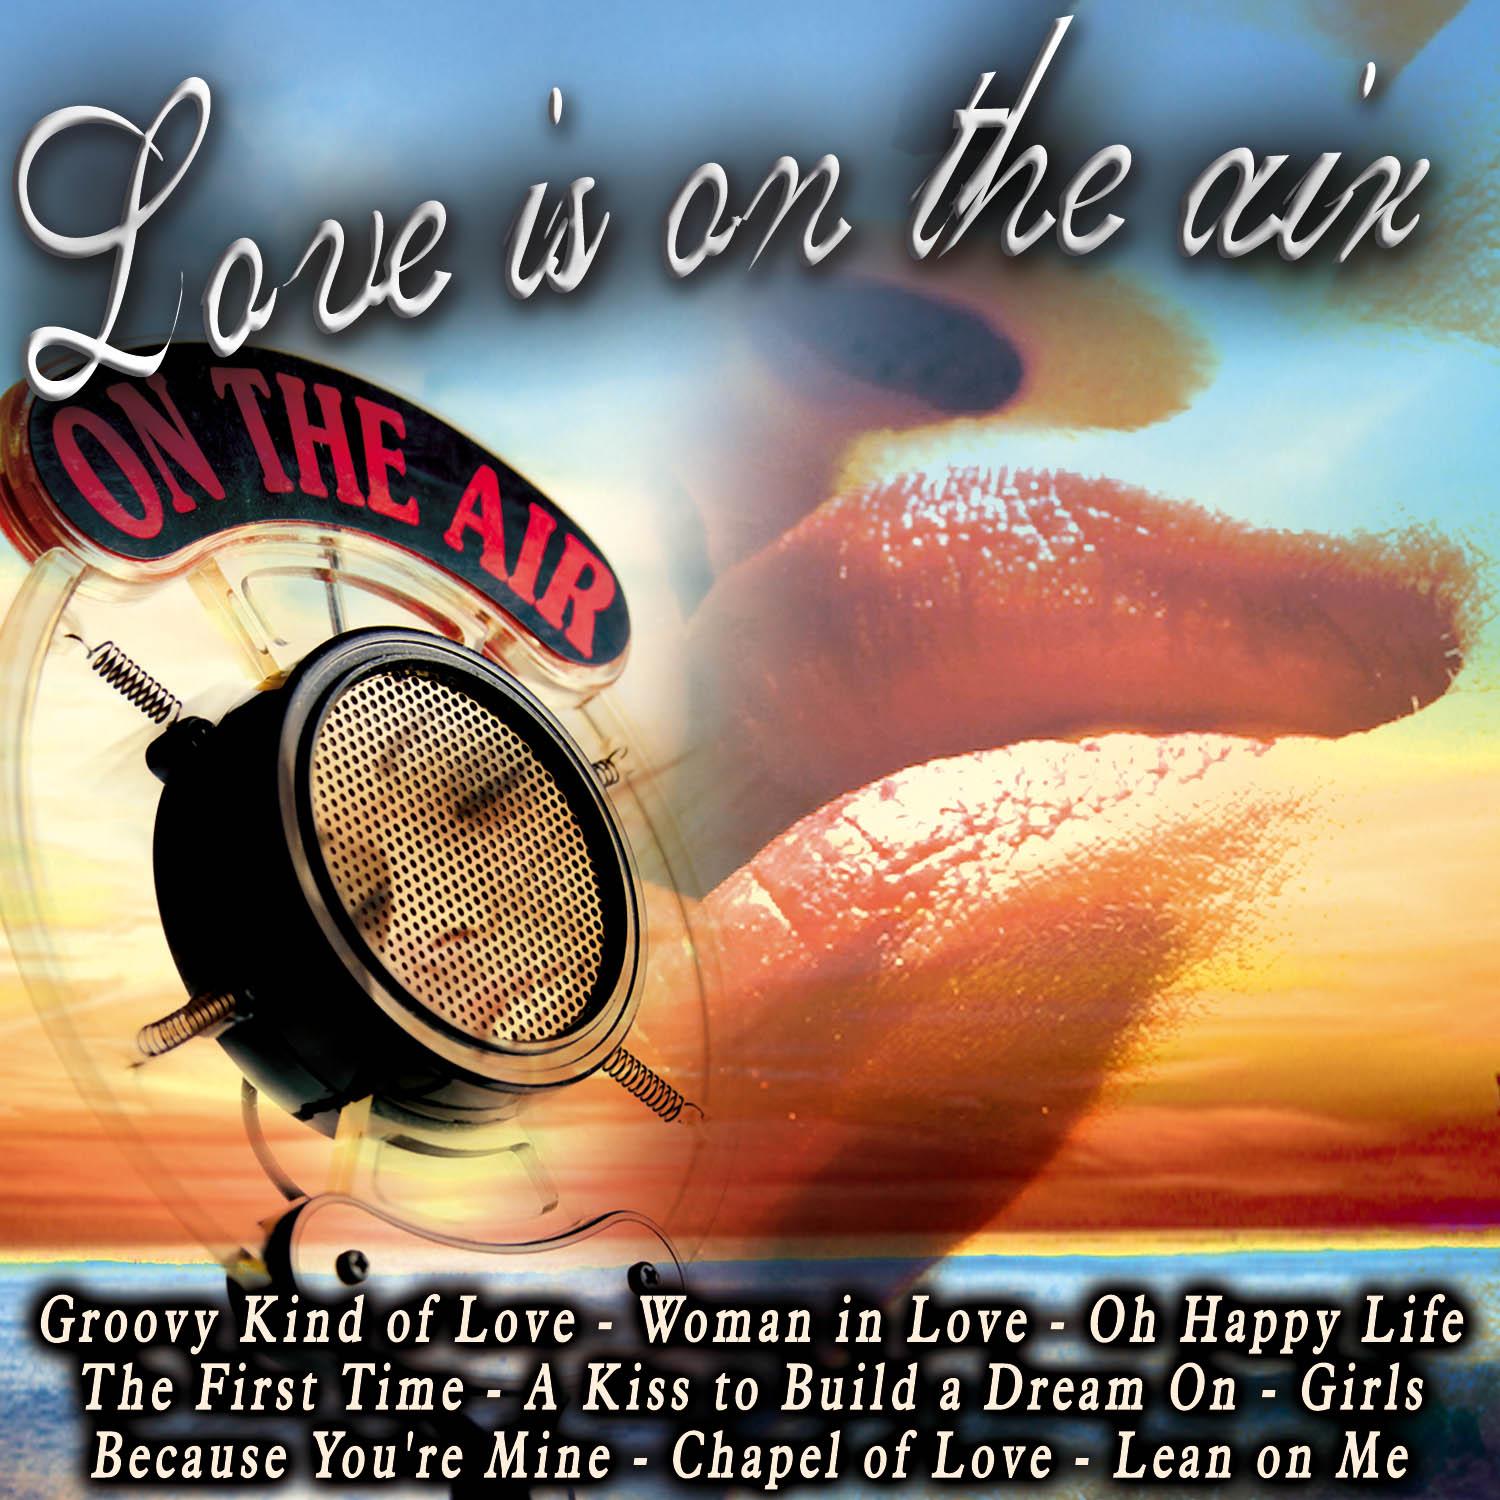 Love Is On the Air